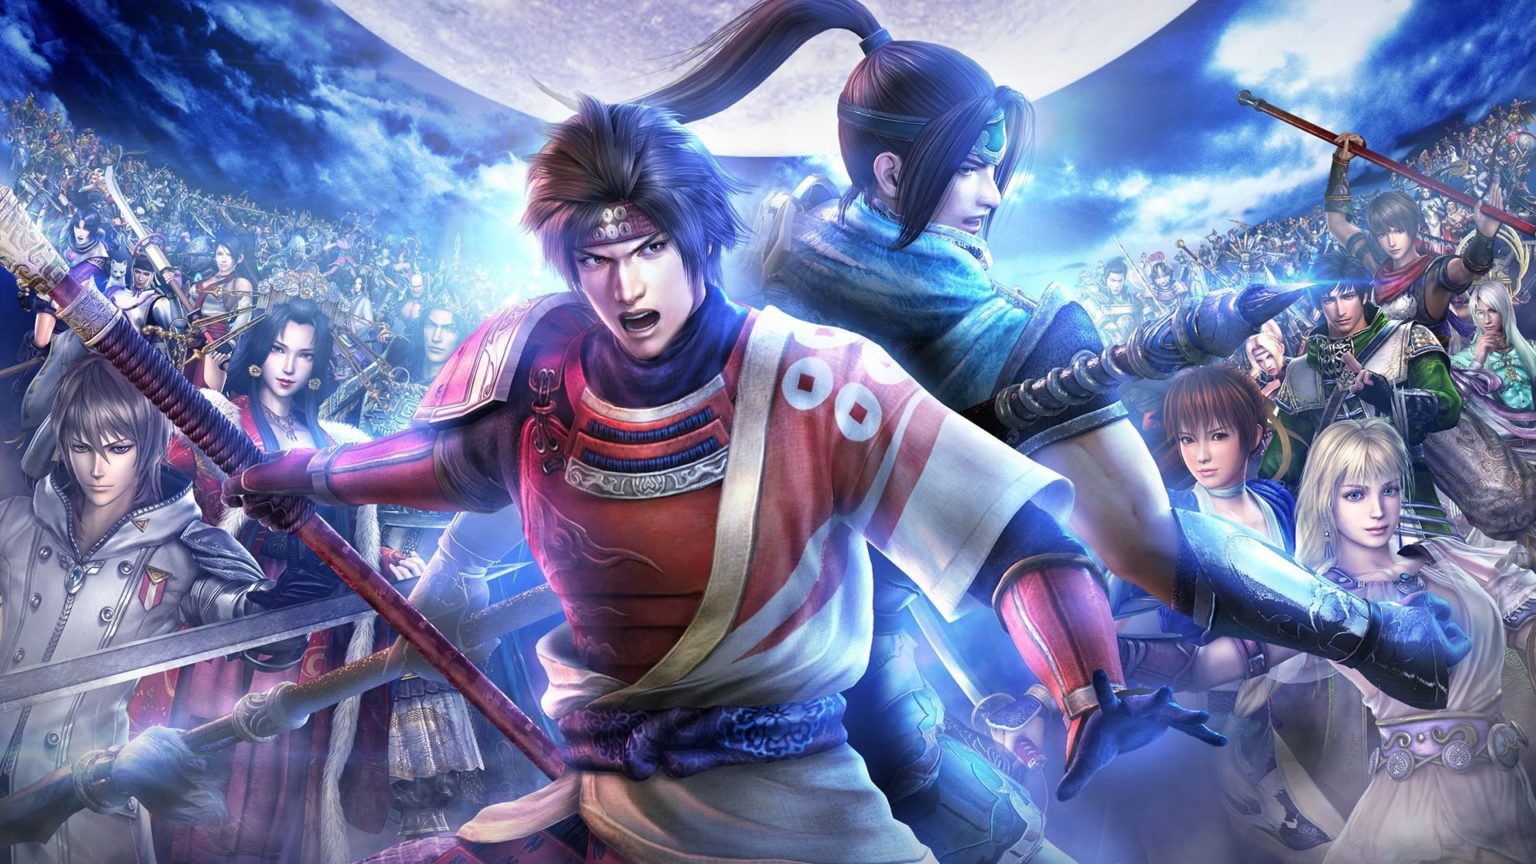 Characters from 2018's Warriors Orochi 4 release